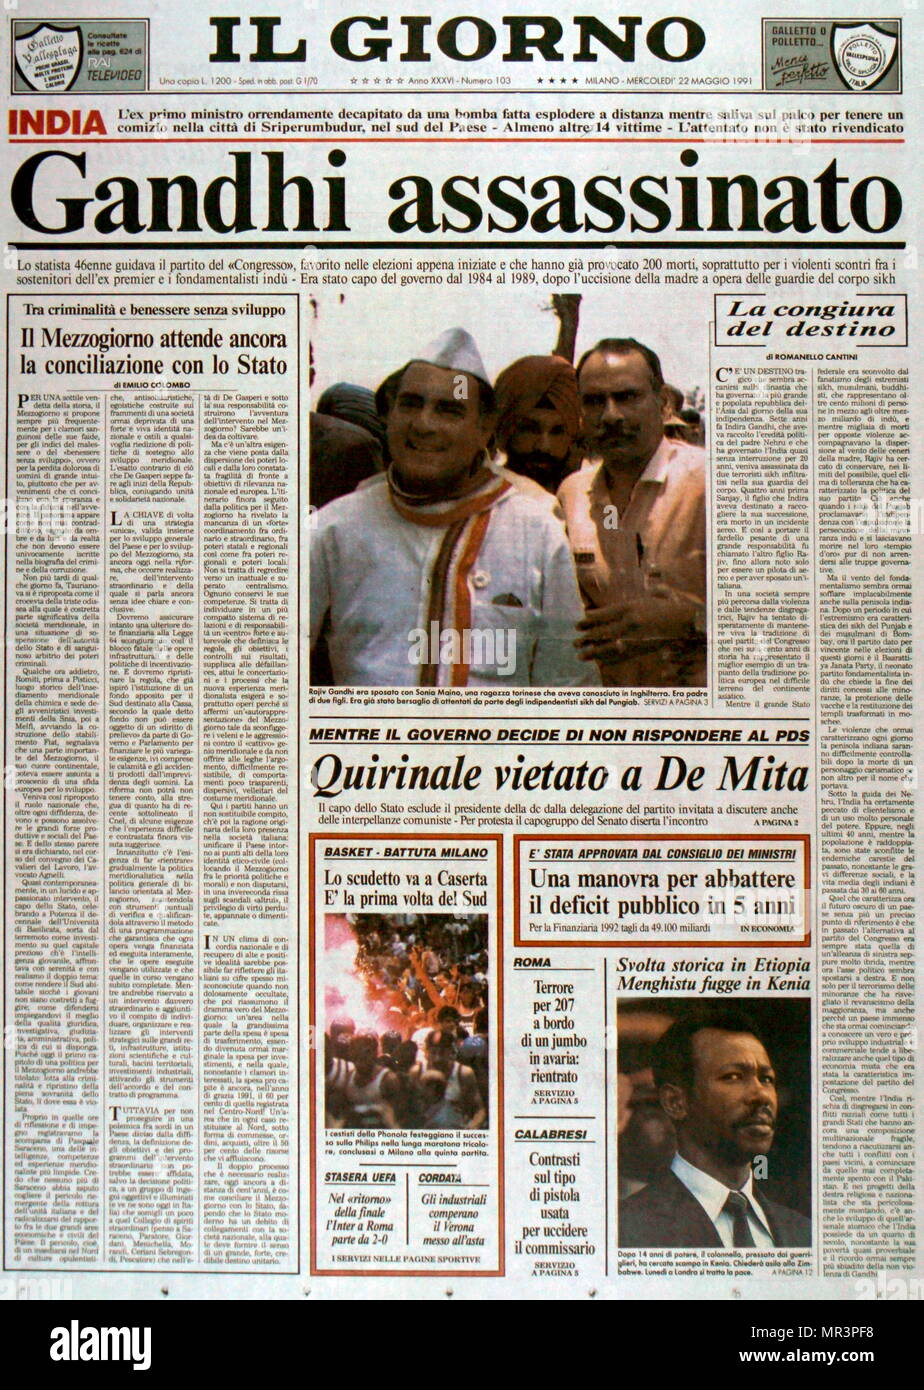 Front Cover Of The Italian Newspaper Il Giorno Following The Assassination Of Rajiv Gandhi 1944 1991 6th Prime Minister Of India Serving From 1984 To 1989 He Took Office After The